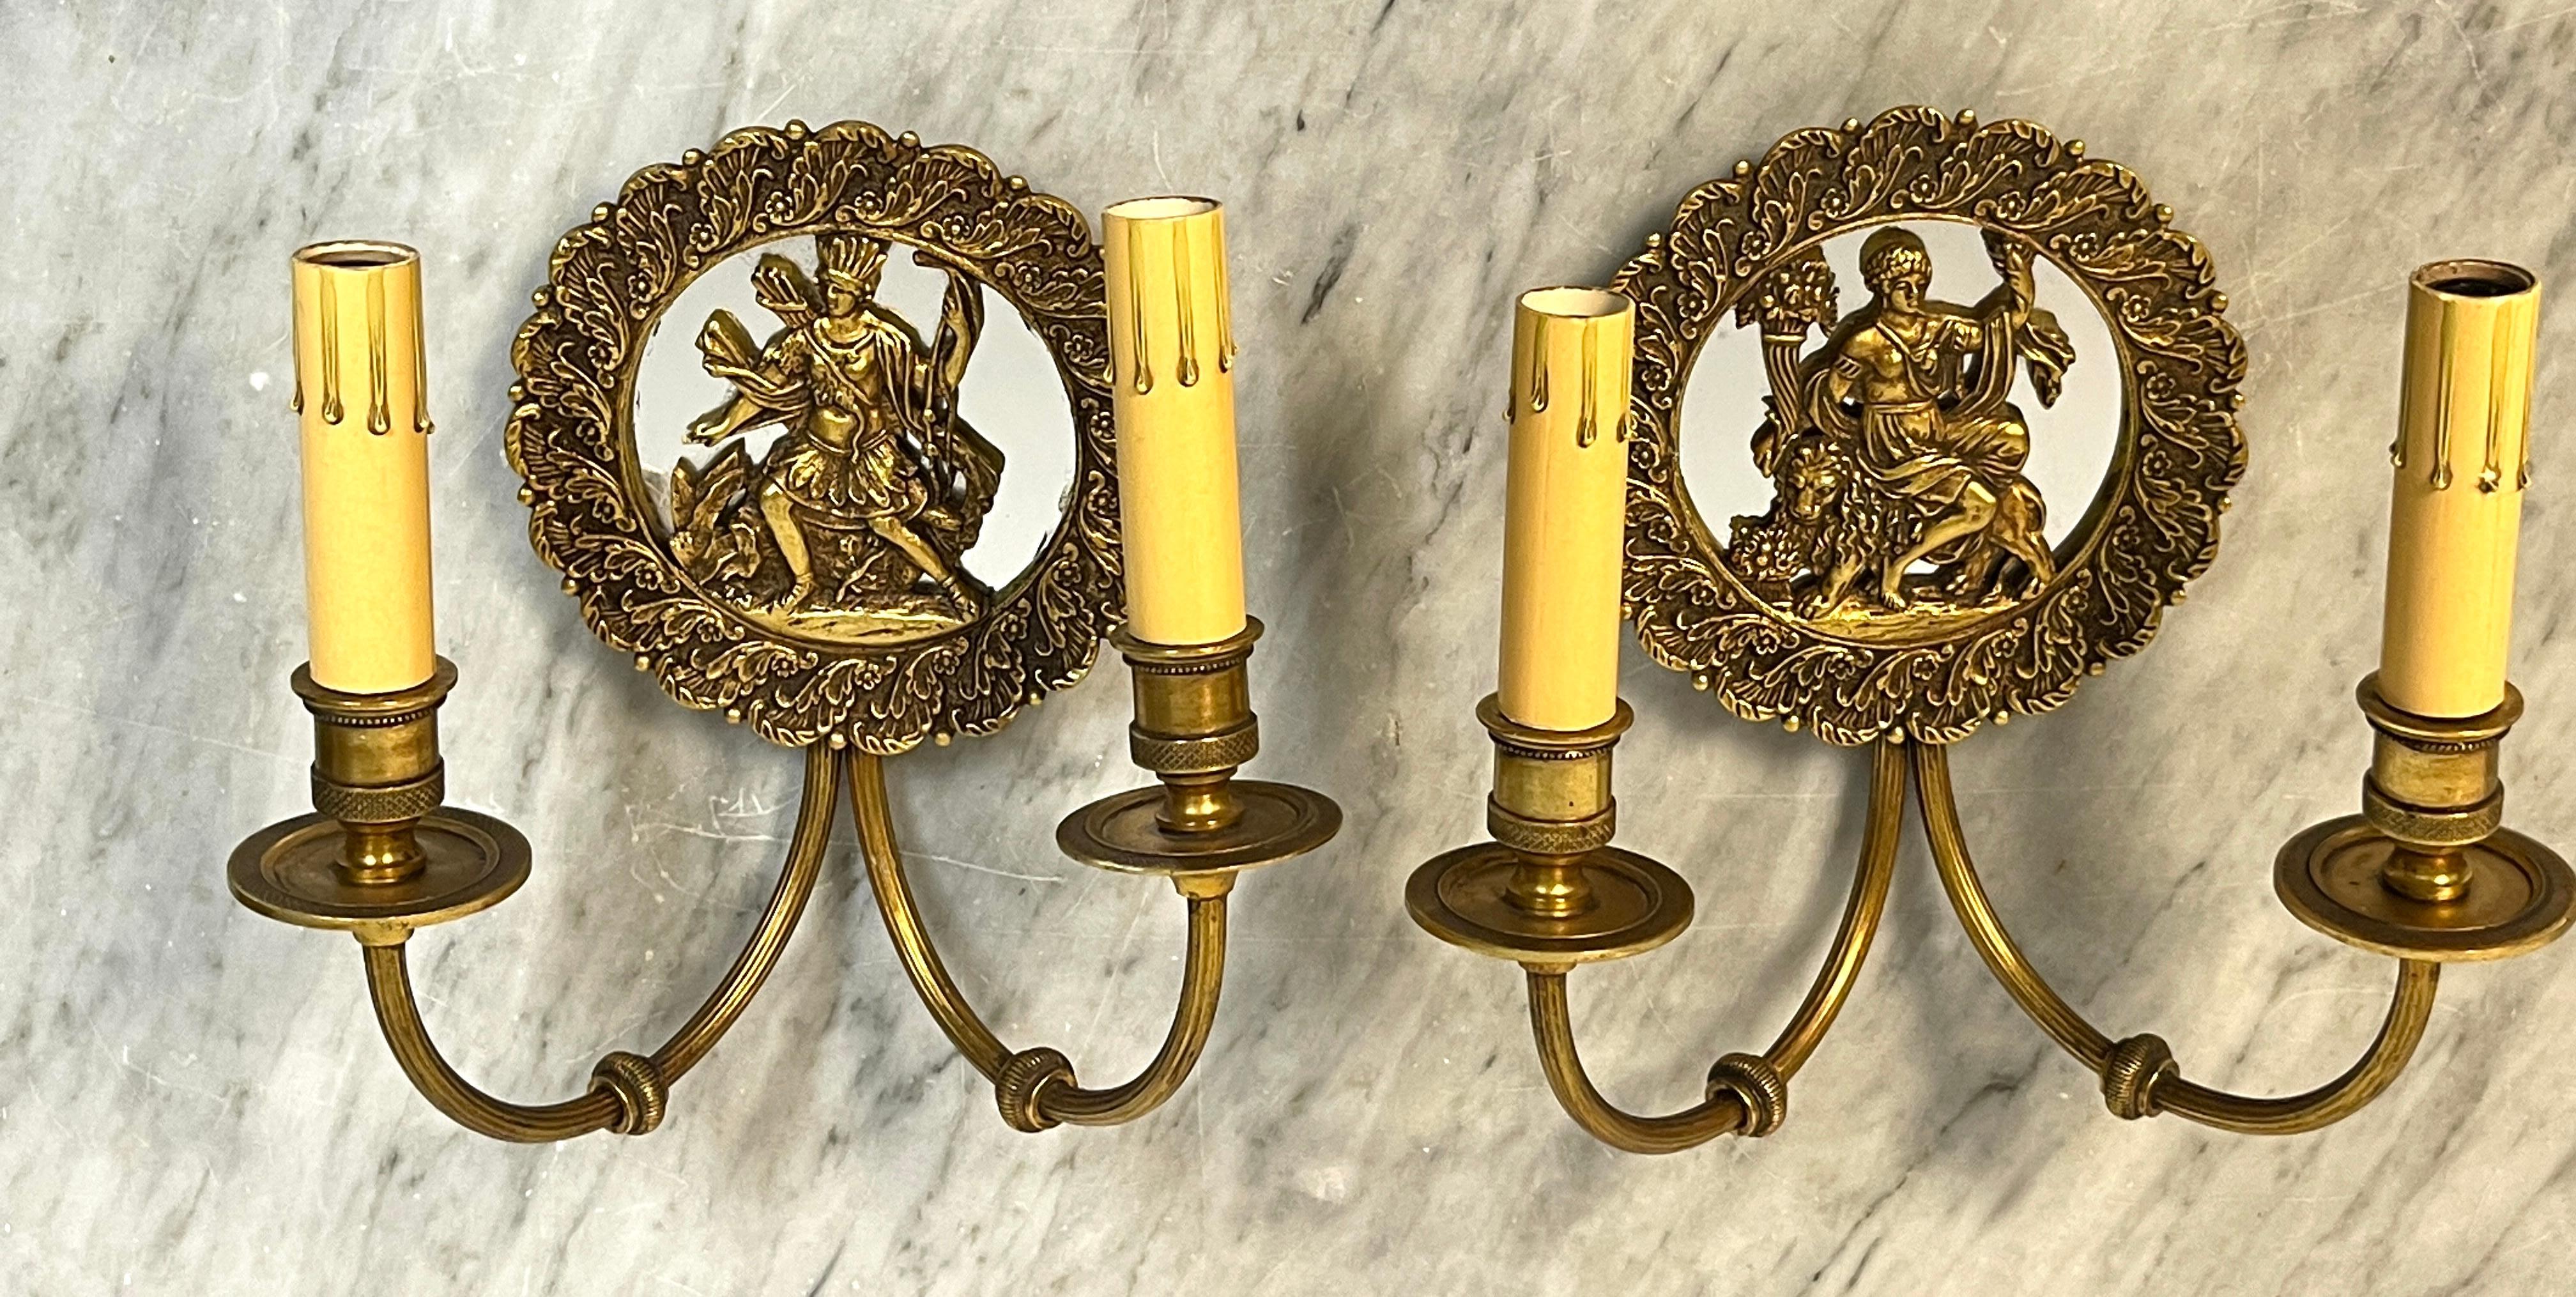 Pair of French Bronze & Mirror Medallion 'America & Europe'  Wall Sconces  
France, circa 1950s

A fine pair of of French bronze wall sconces one each one with a  5.5 Inch diameter mirrored backed vignettes, one depicting the Americas with an